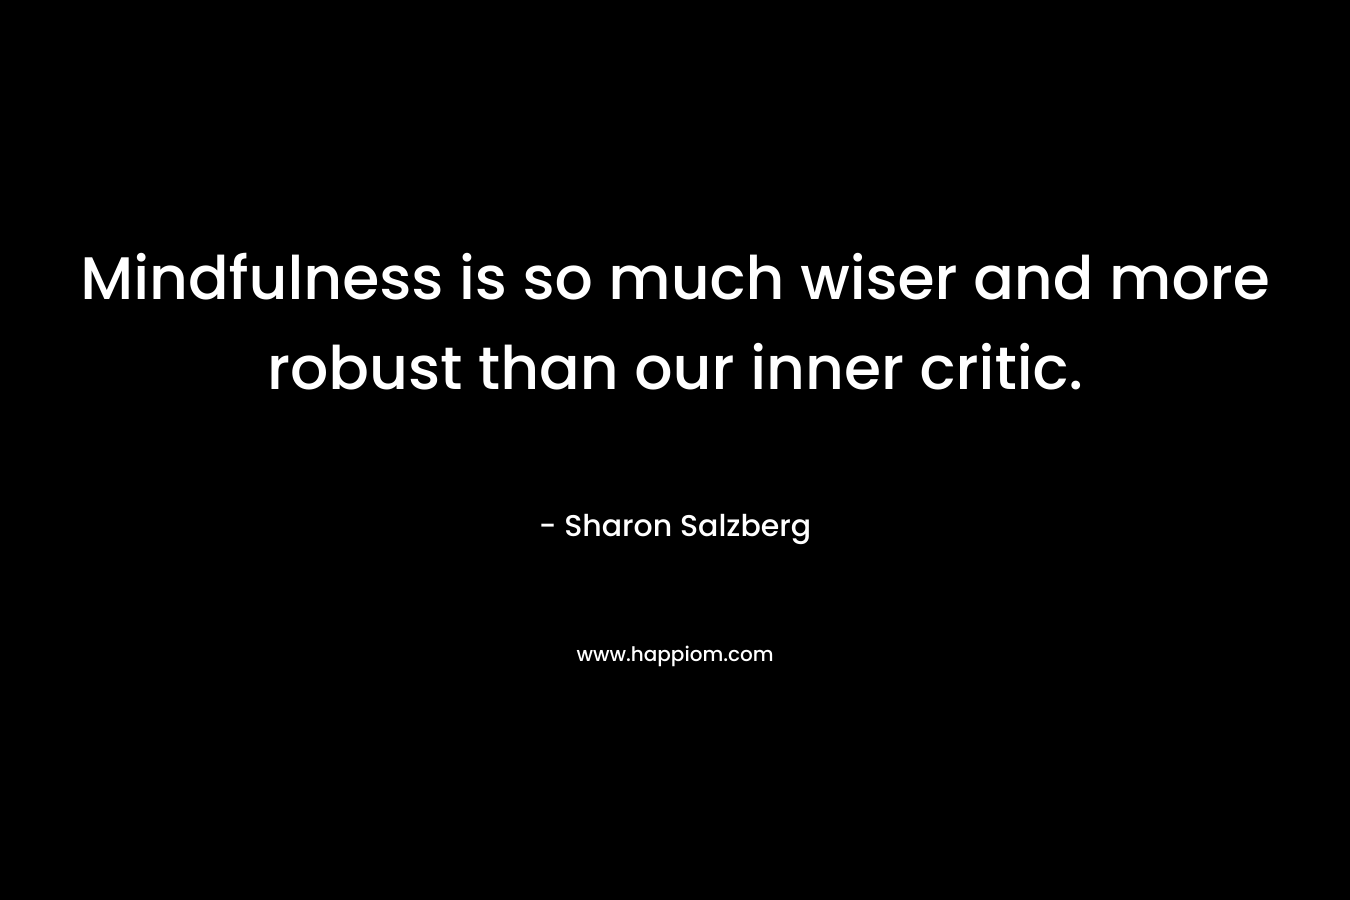 Mindfulness is so much wiser and more robust than our inner critic.